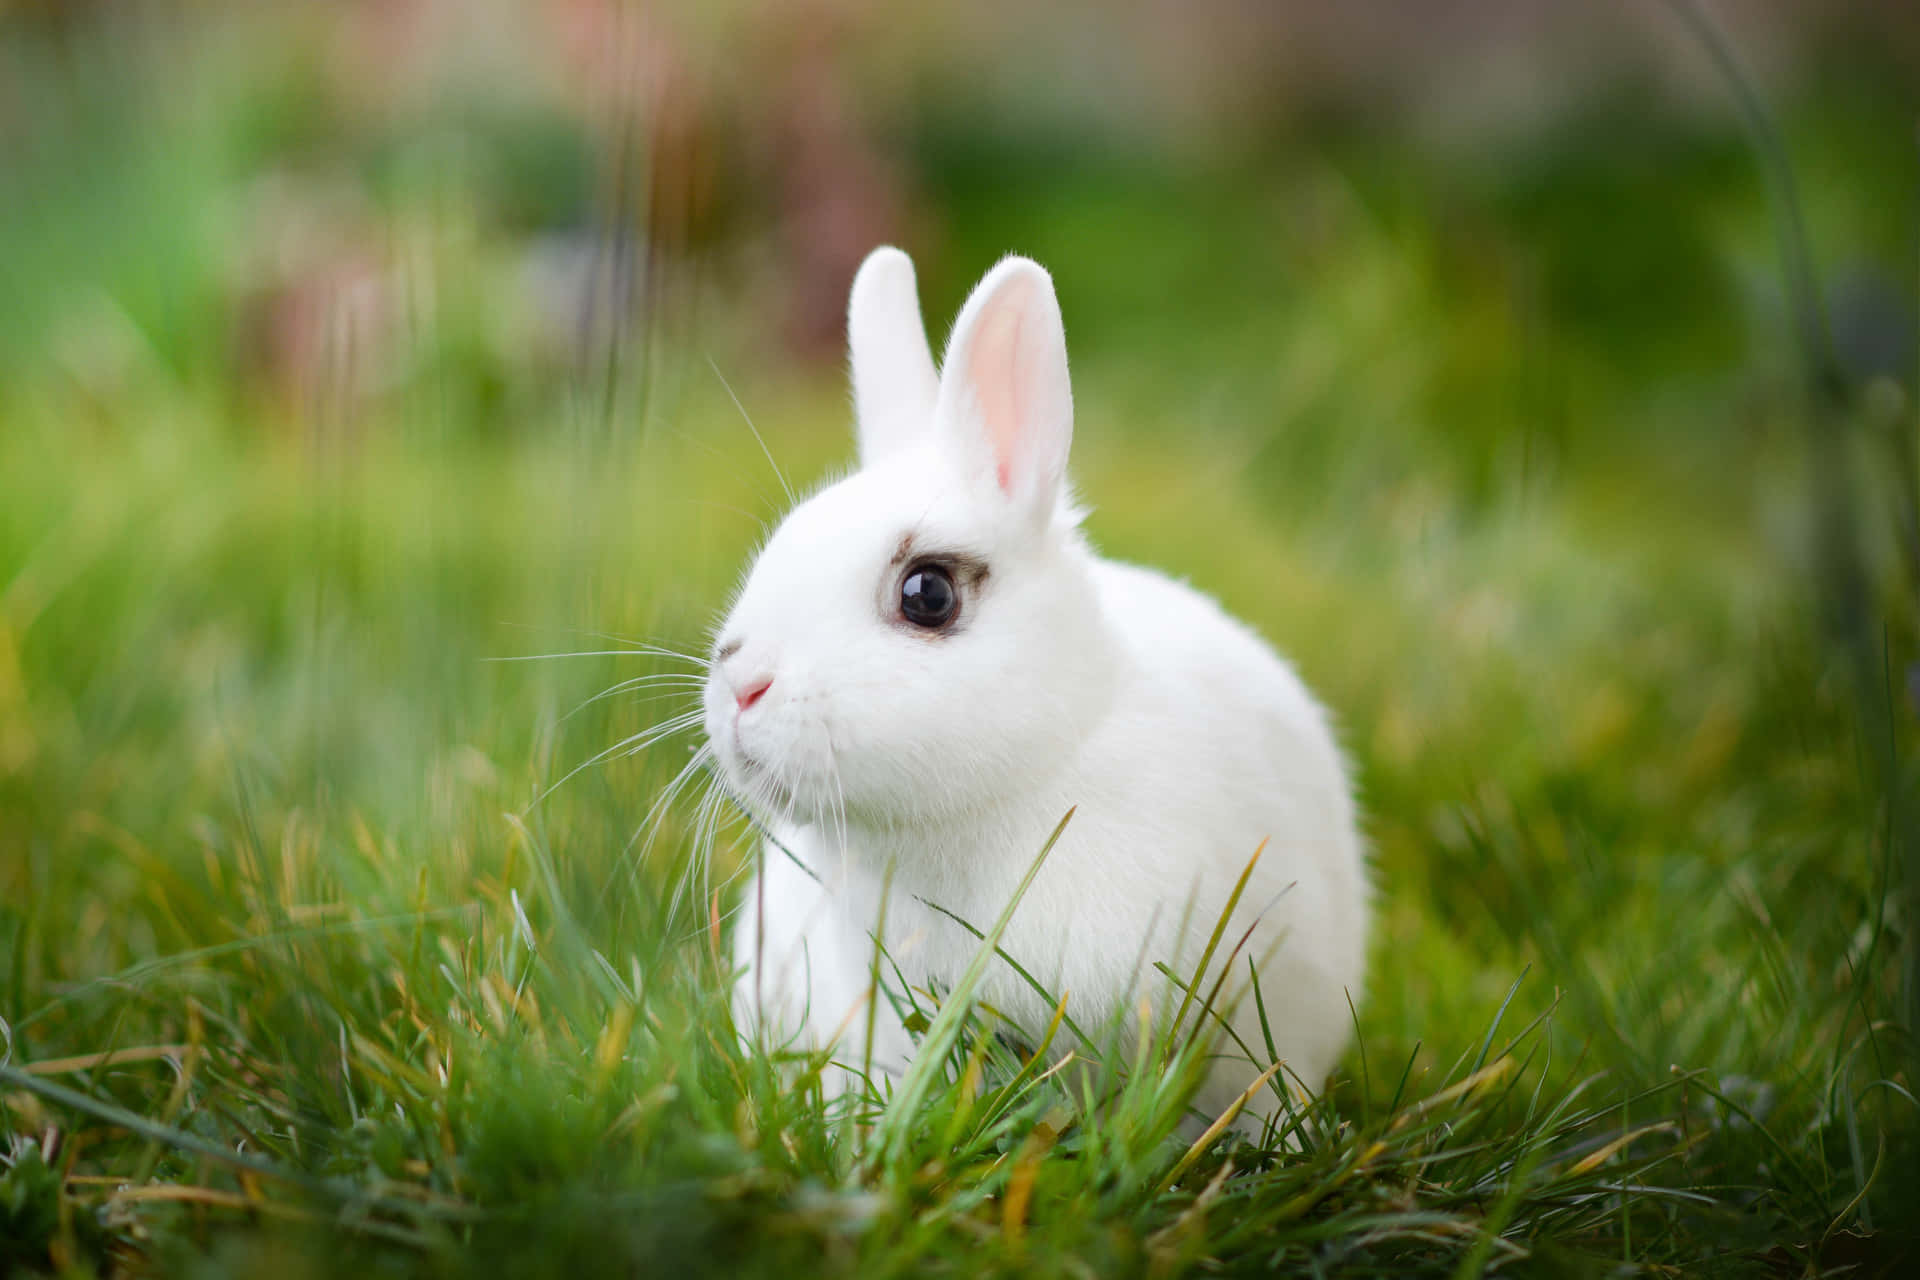 Who could say no to these adorable little bunnies? Wallpaper